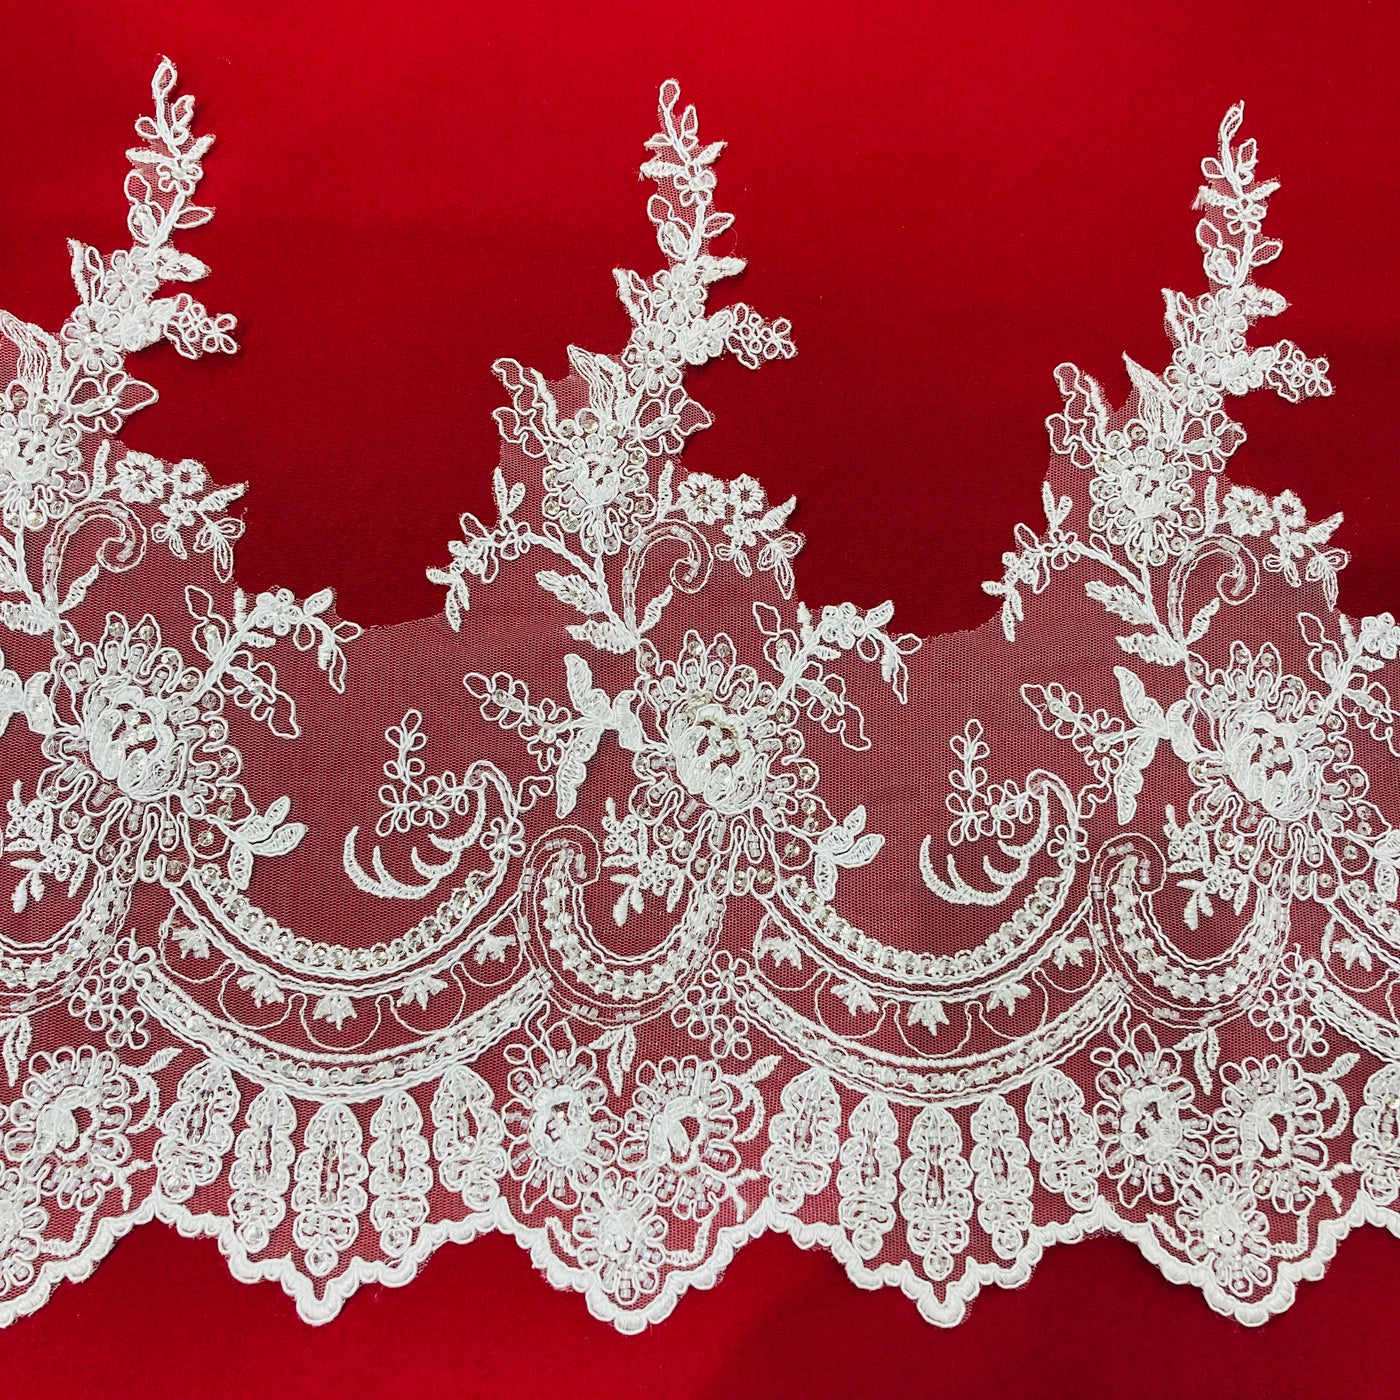 Beaded & Corded Lace Trimming Embroidered on 100% Polyester Net Mesh. Lace USA